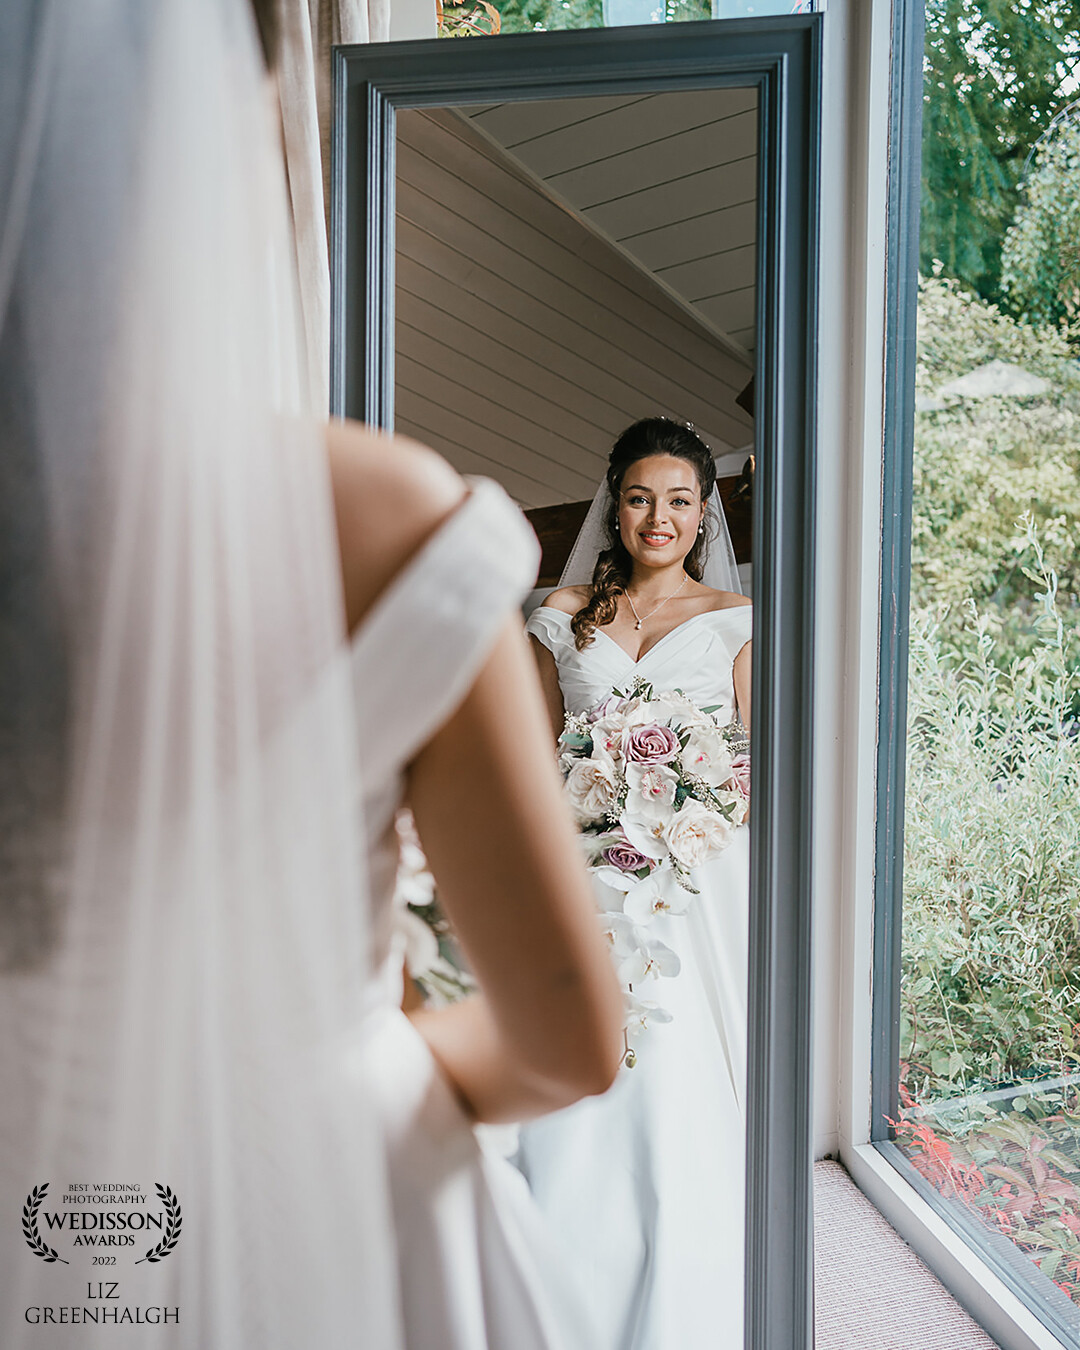 Last minutes check to make sure every detail is in place and that your dream wedding is about to take place at the amazing wedding venue South Farm